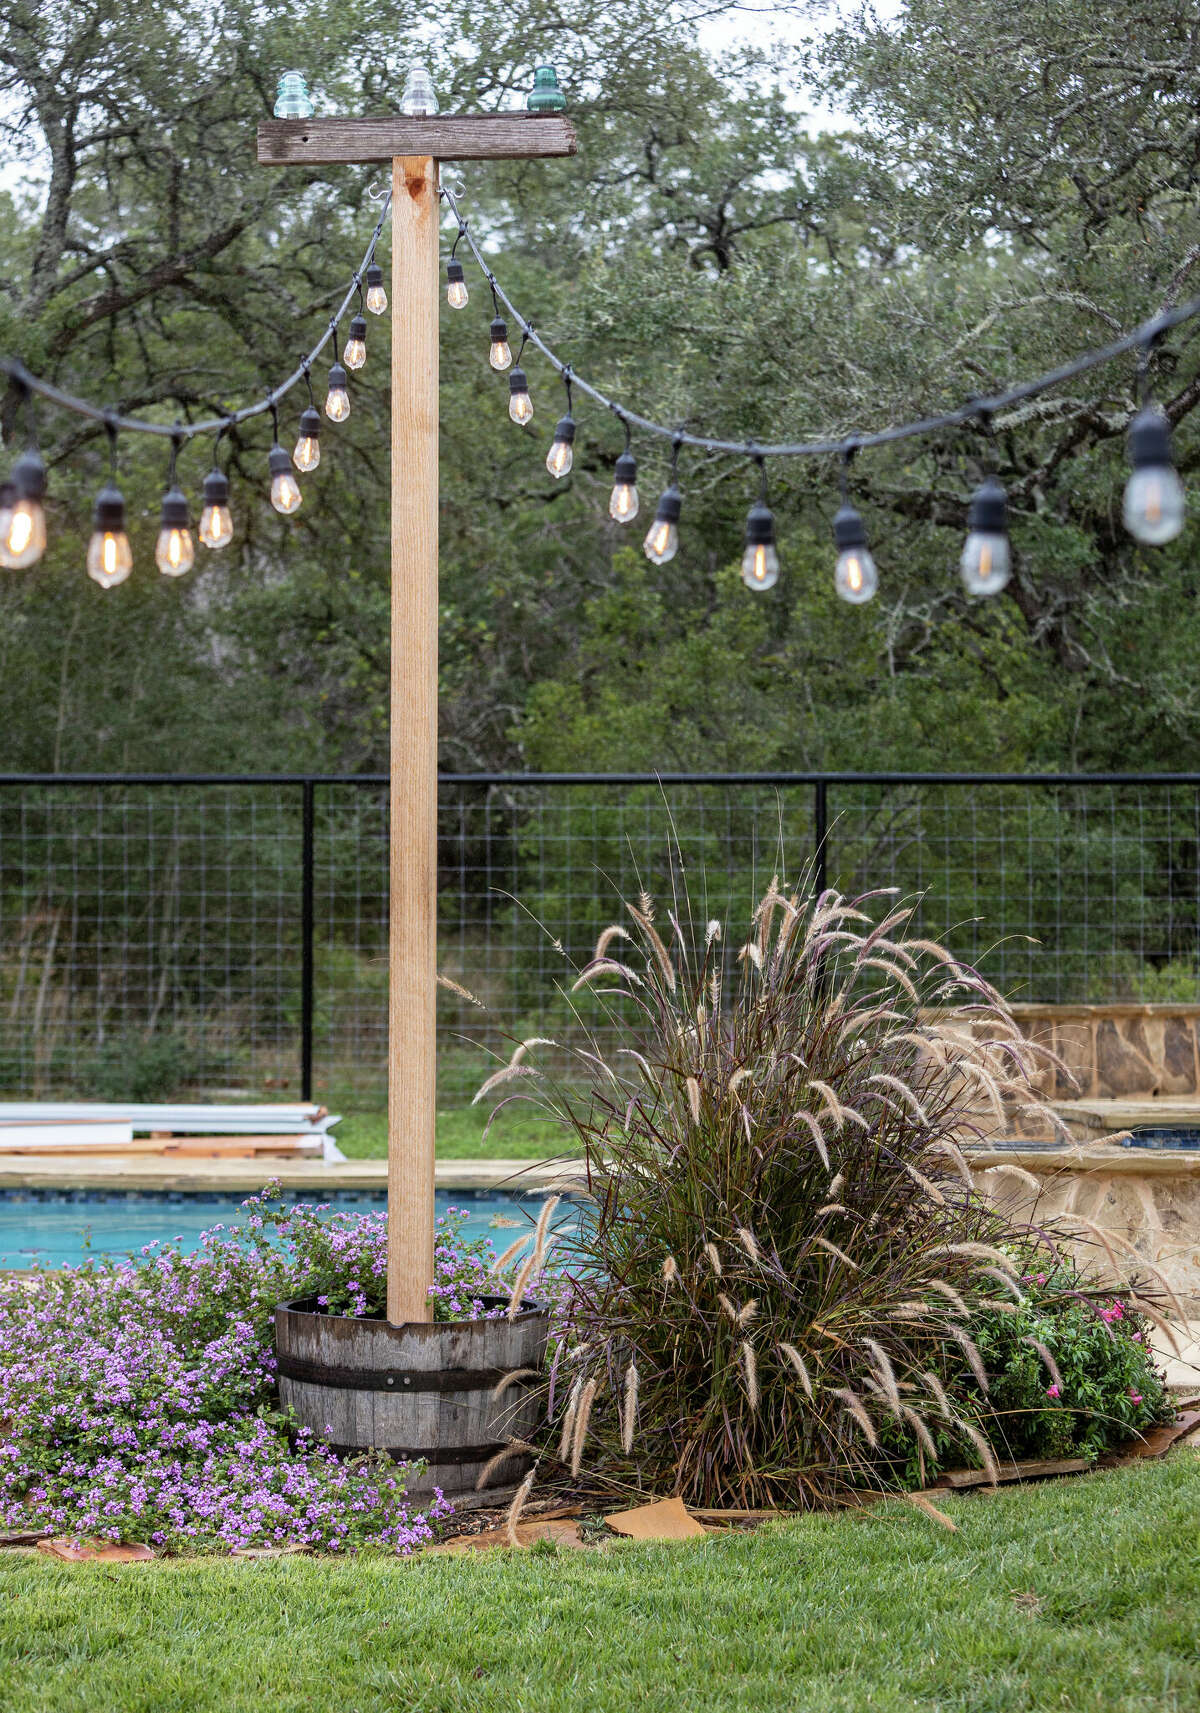 Strings of Edison-style lights run from the house to a pair of posts near the pool.  These posts are topped with several vintage glass insulators.